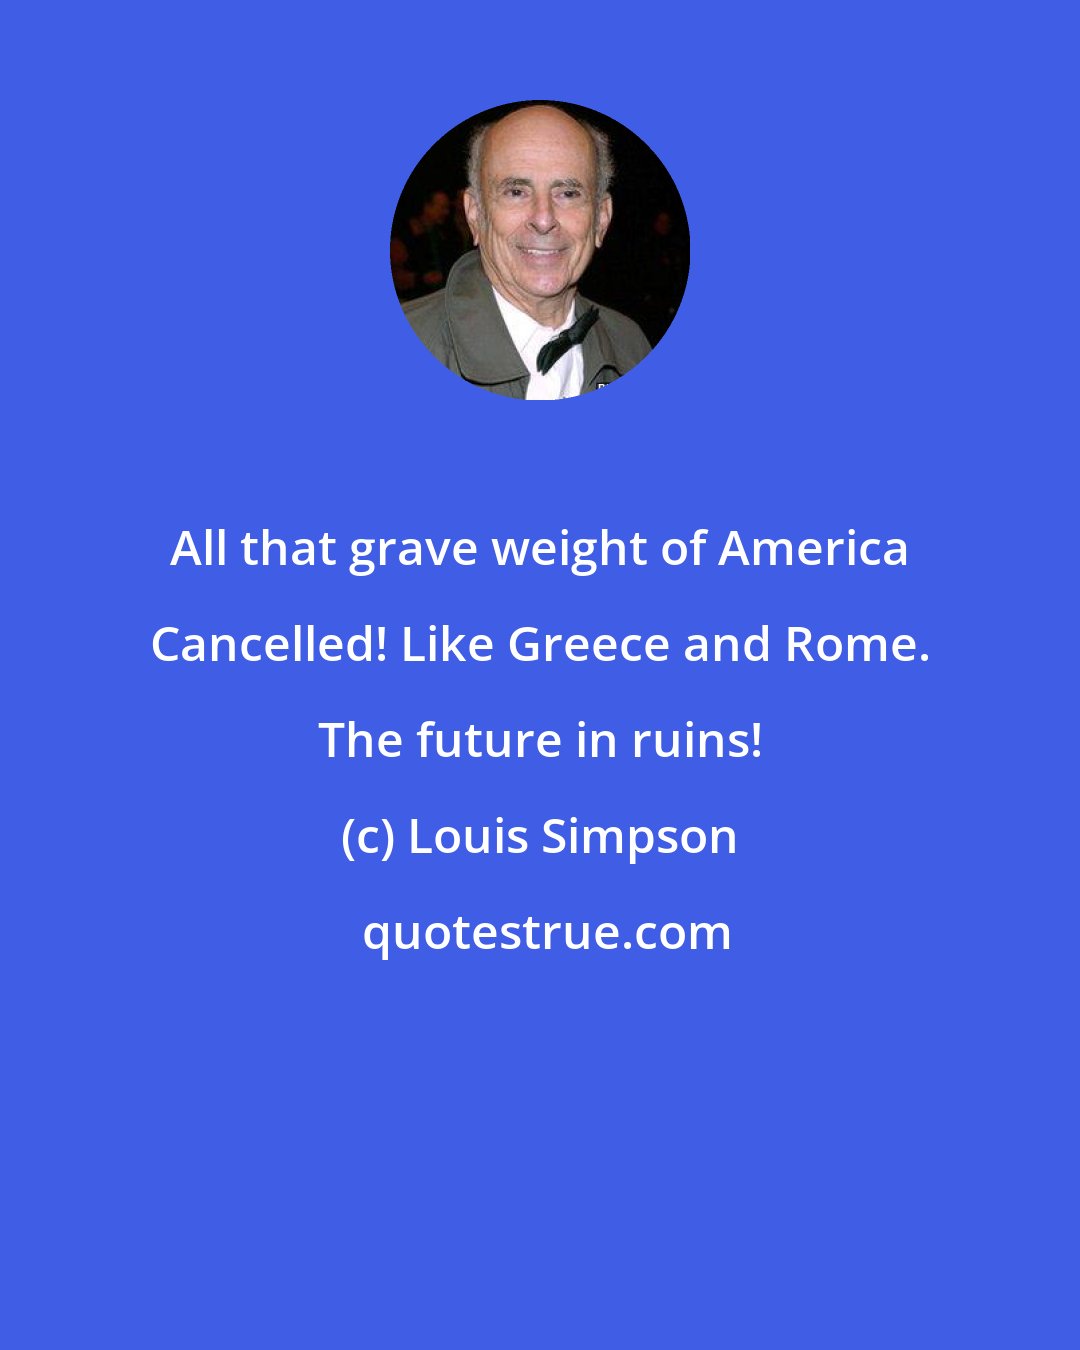 Louis Simpson: All that grave weight of America Cancelled! Like Greece and Rome. The future in ruins!